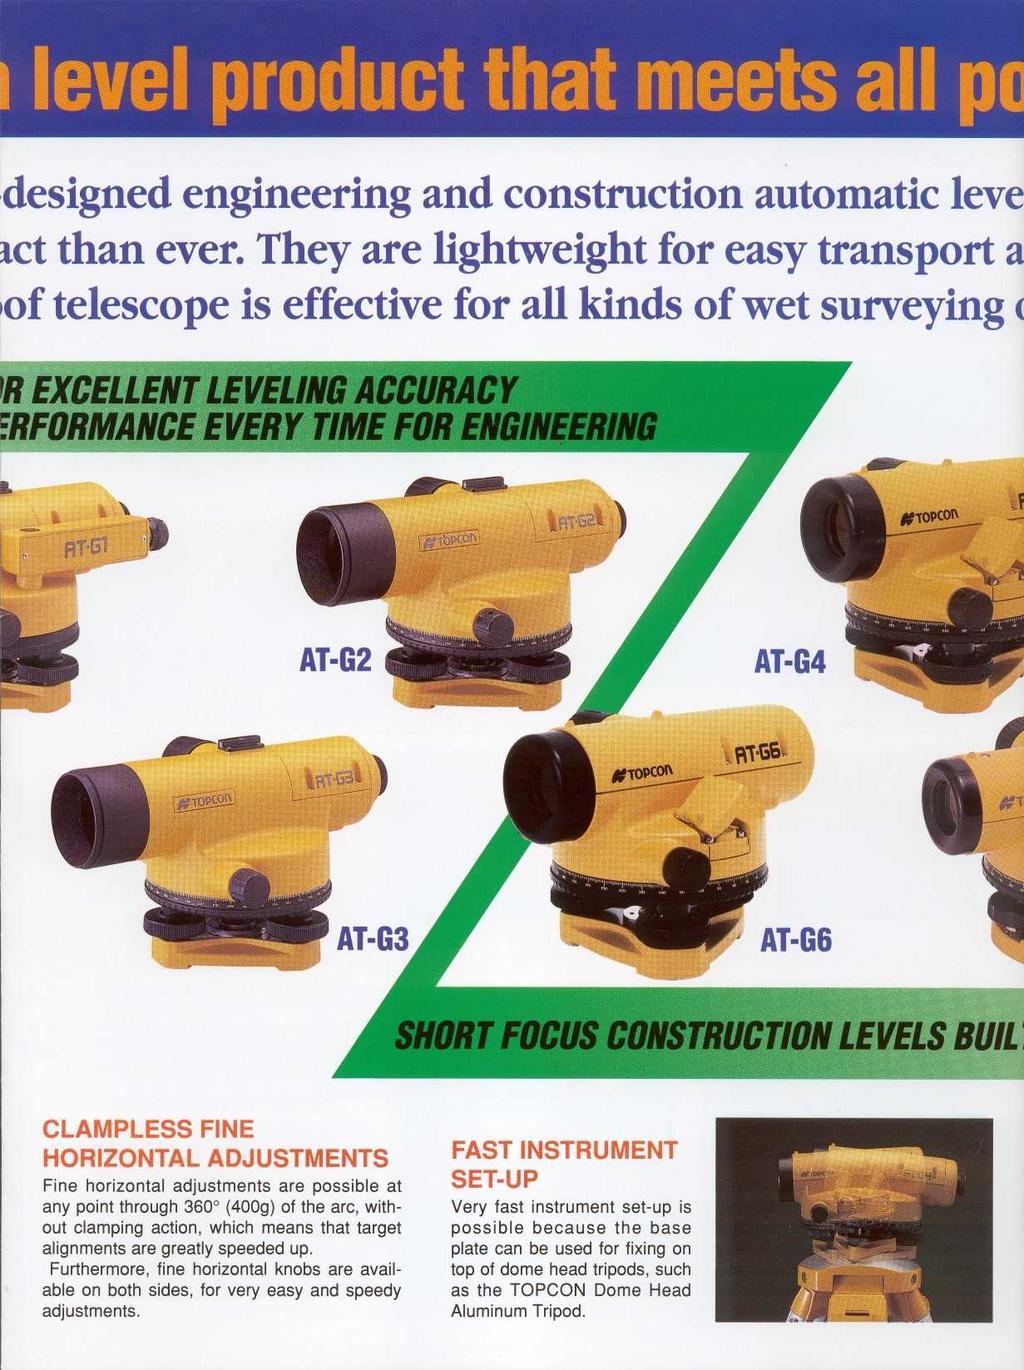 designed engineering and construction automatic leve pct than ever.